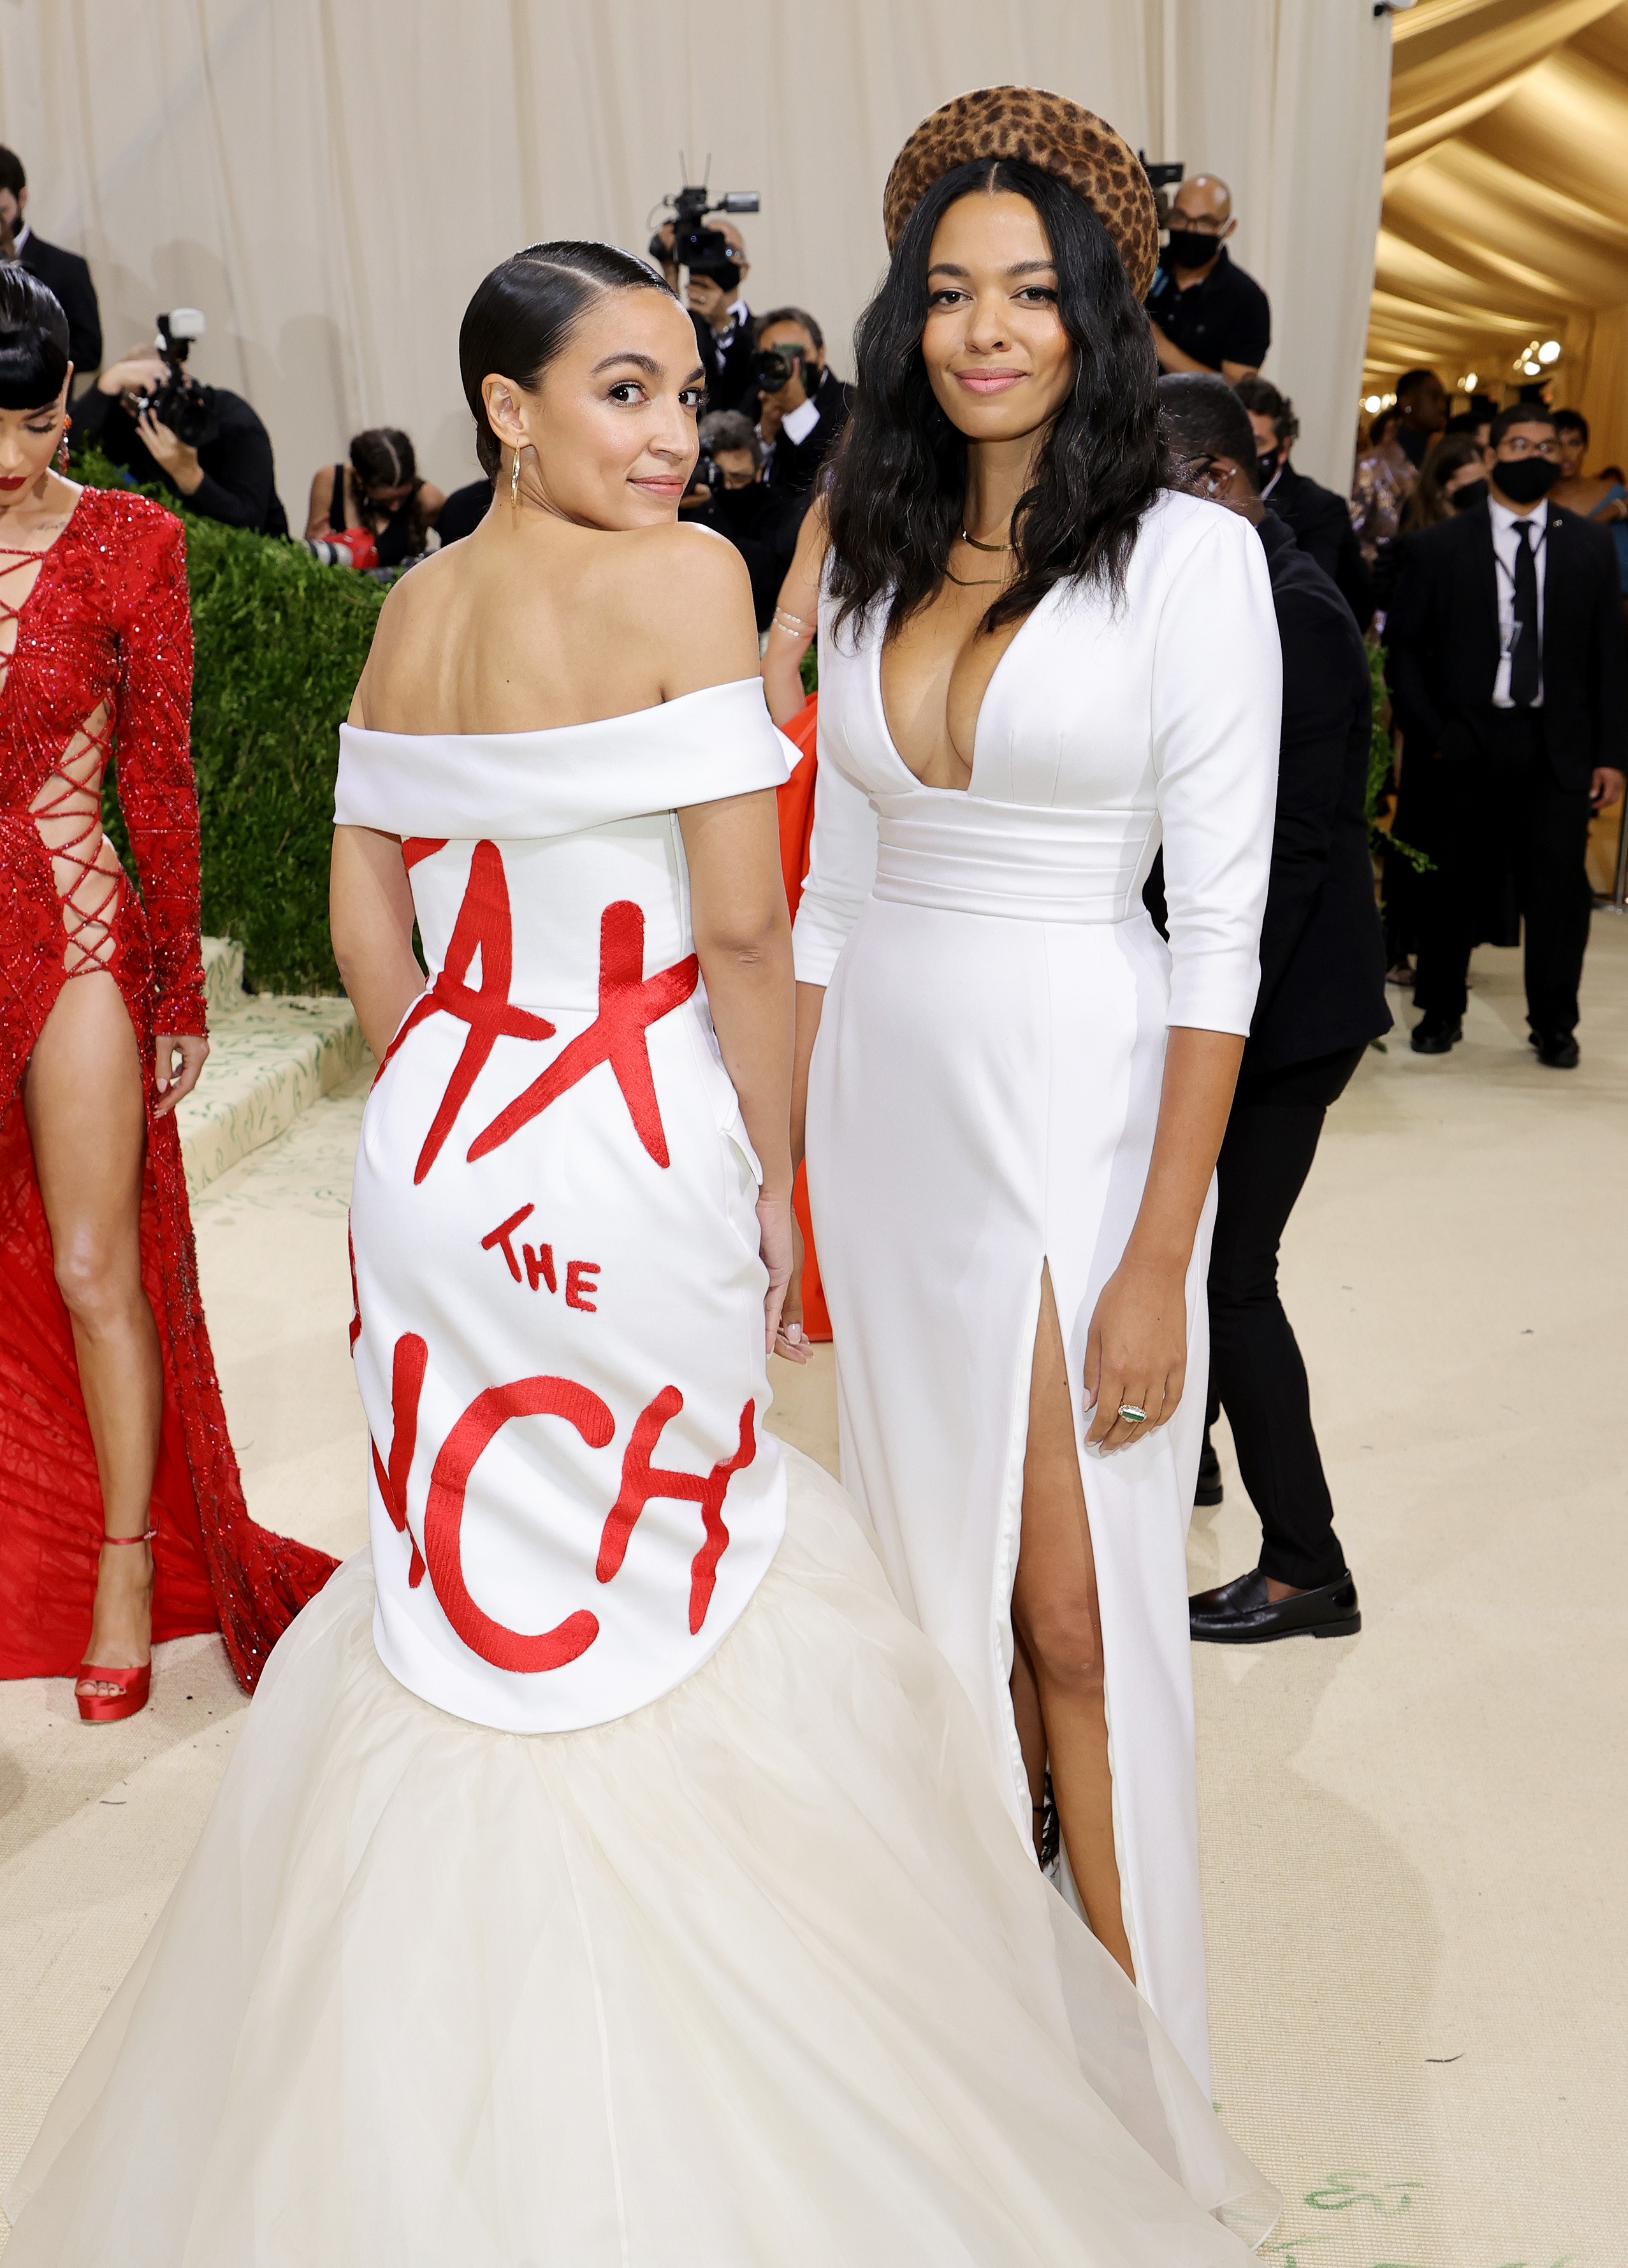 Alexandria Ocasio-Cortez (L) attends The 2021 Met Gala Celebrating In America: A Lexicon Of Fashion at Metropolitan Museum of Art on September 13, 2021 in New York City.&nbsp;(Mike Coppola/Getty Images/AFP)